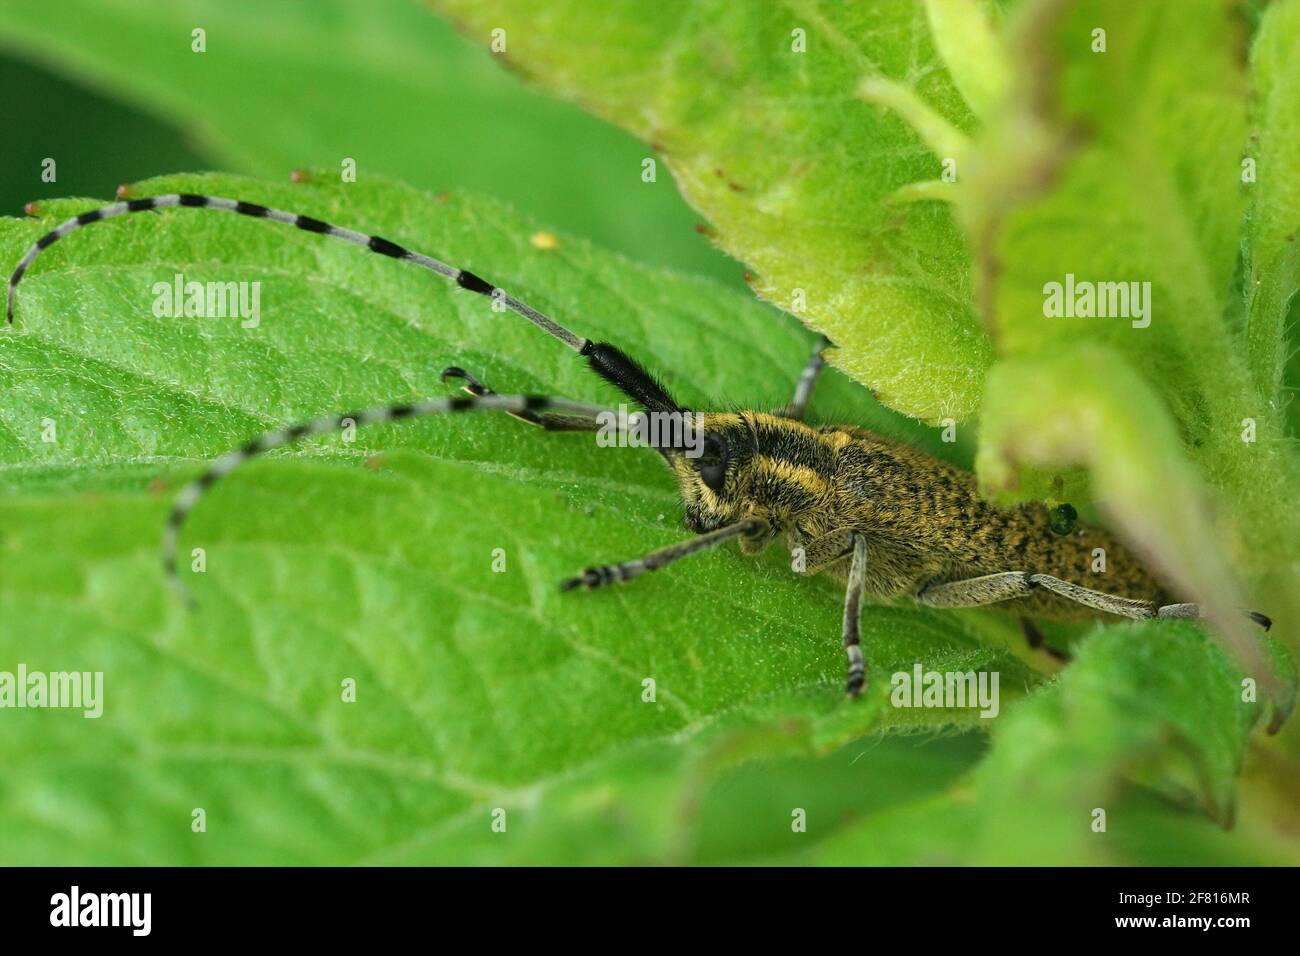 Closeup shot of a golden-bloomed gray longhorn beetle among green leaves Stock Photo